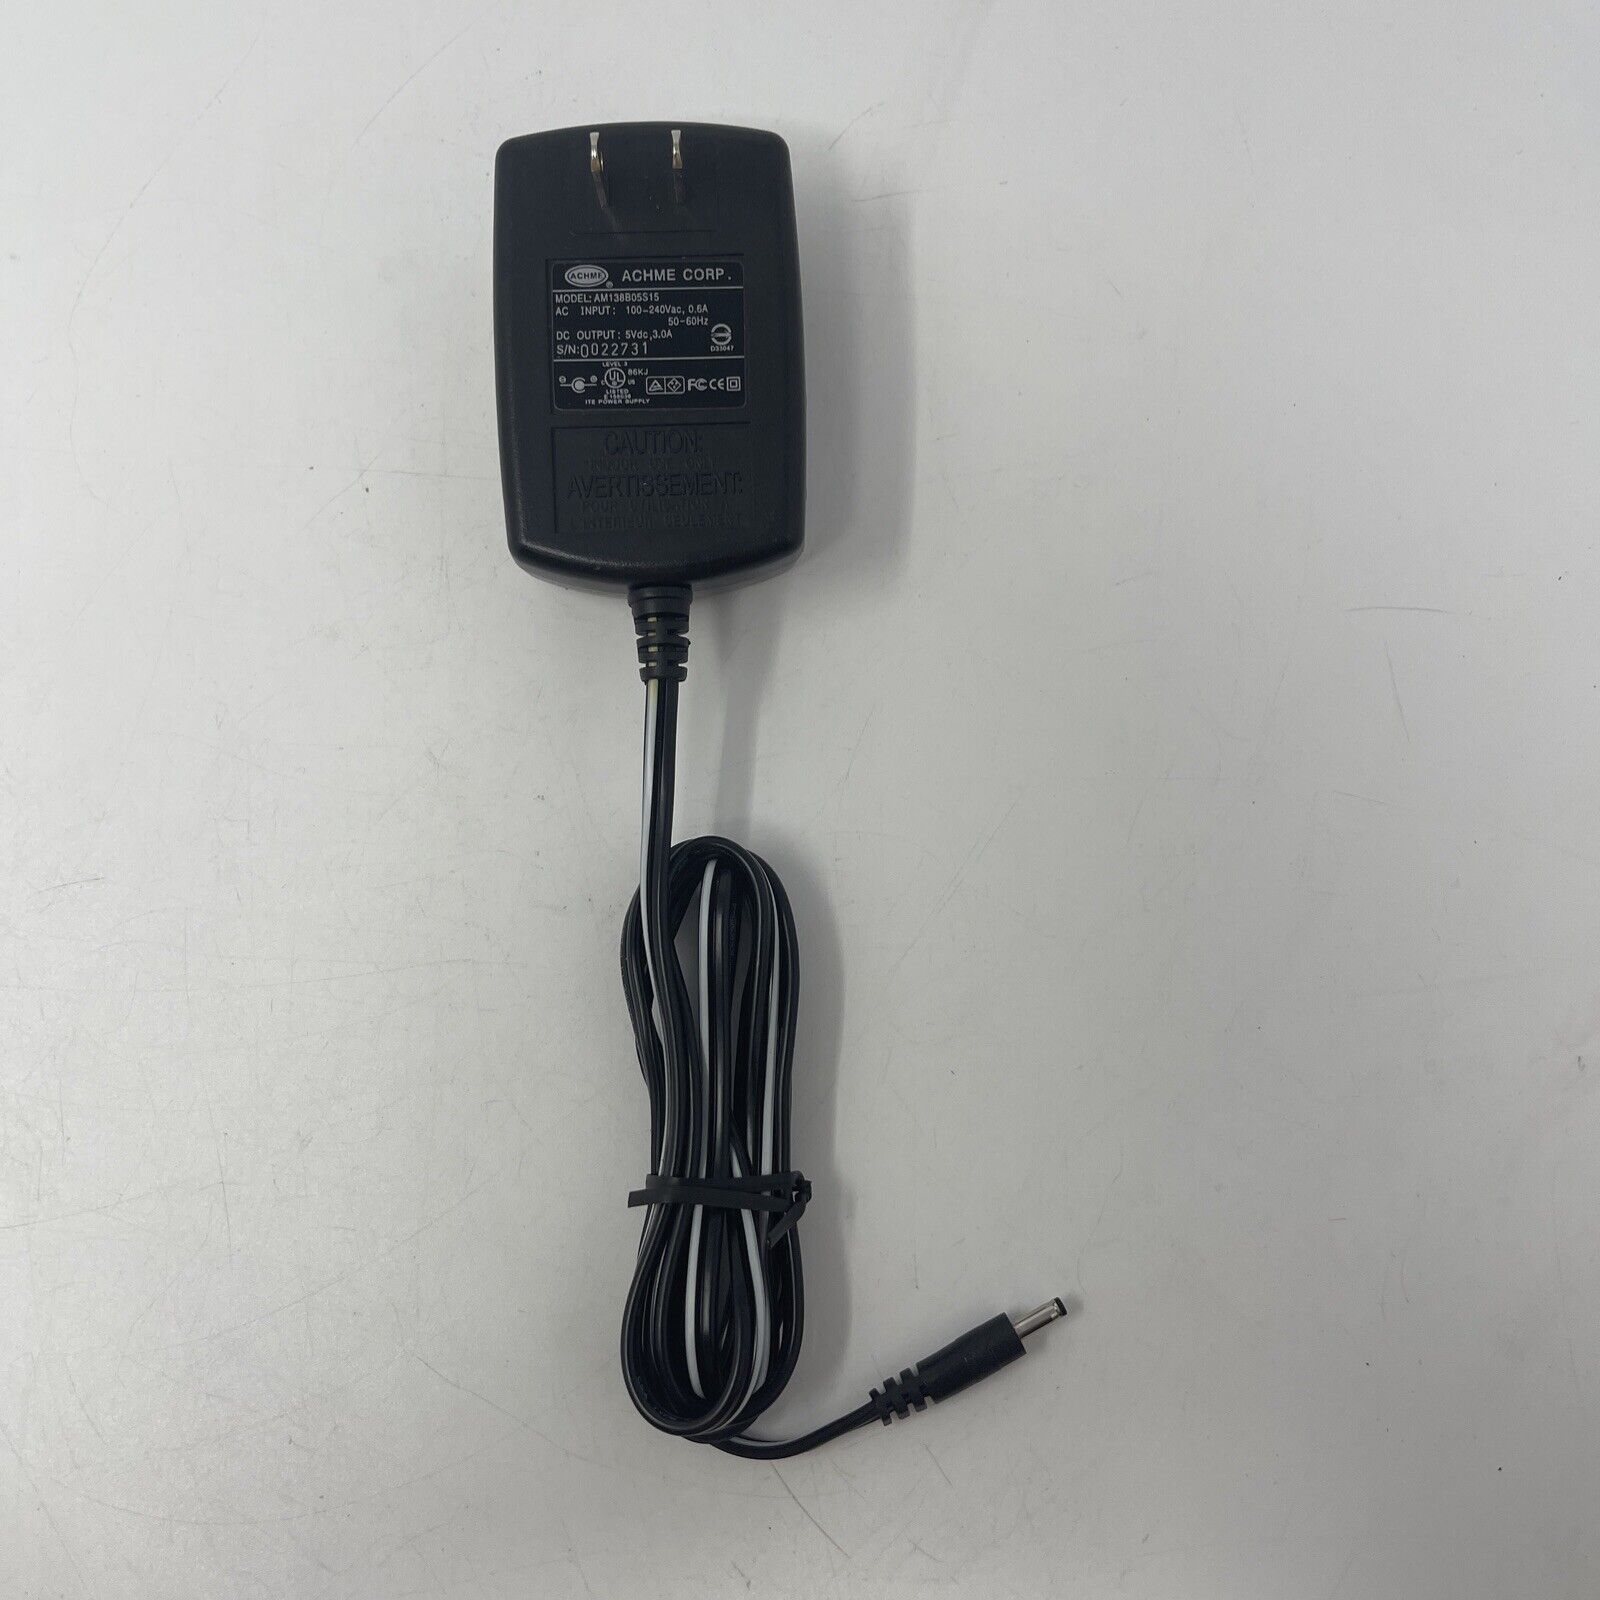 AC Adapter For Arcade1up Game Machines Arcade 1up Fits ALL Riser Power Supply Features: Advanced Design, High Portabili